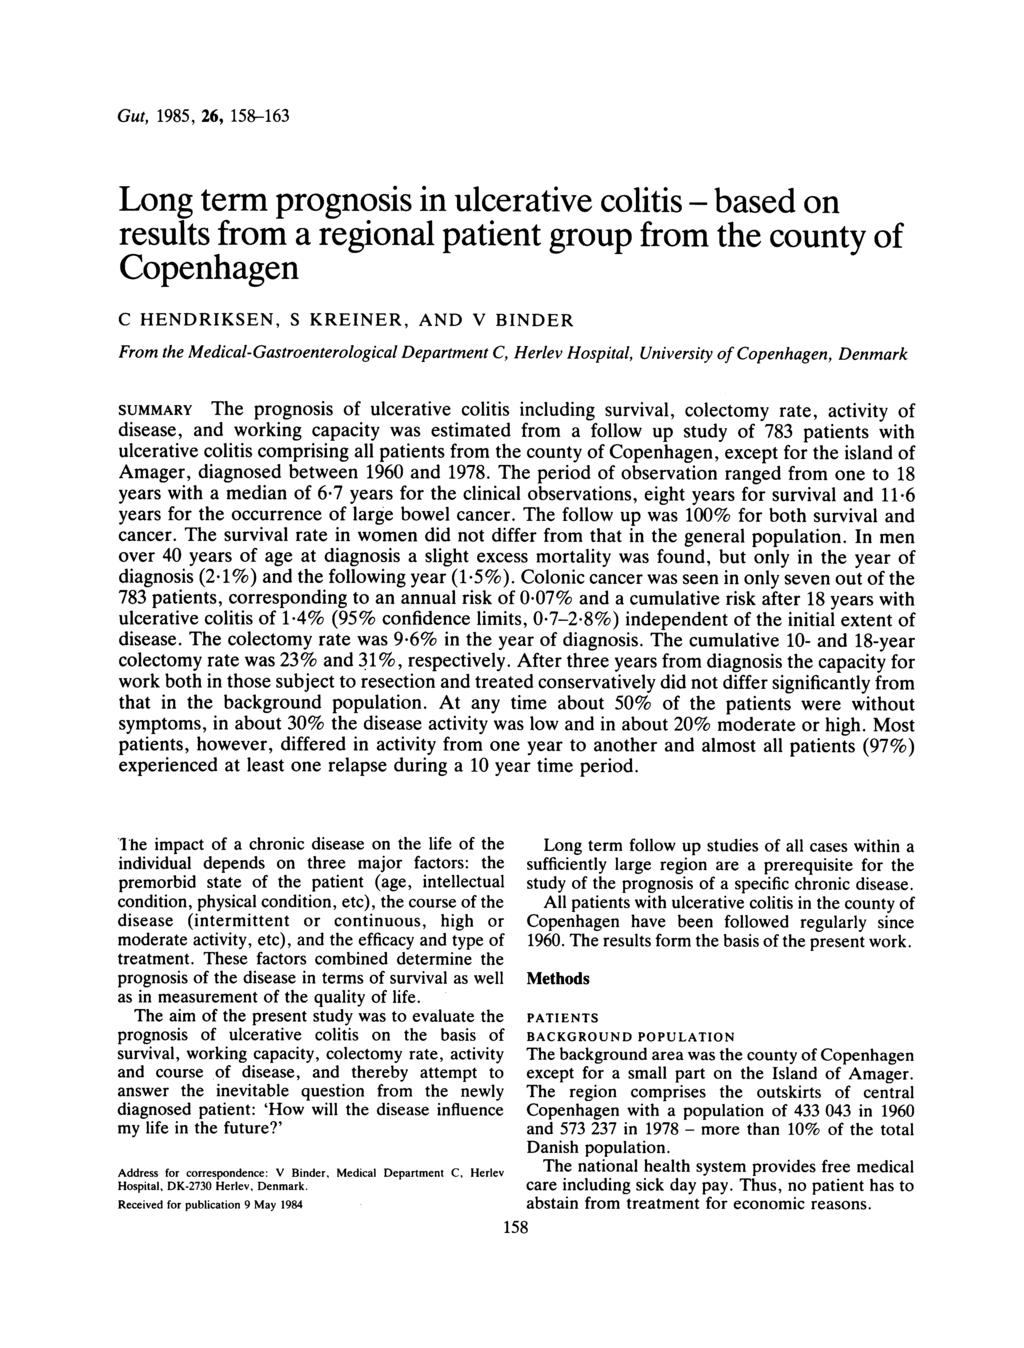 Gut, 1985, 26, 158-163 Long term prognosis in ulcerative colitis based on results from a regional patient group from the county of Copenhagen C HENDRIKSEN, S KREINER, AND V BINDER From the